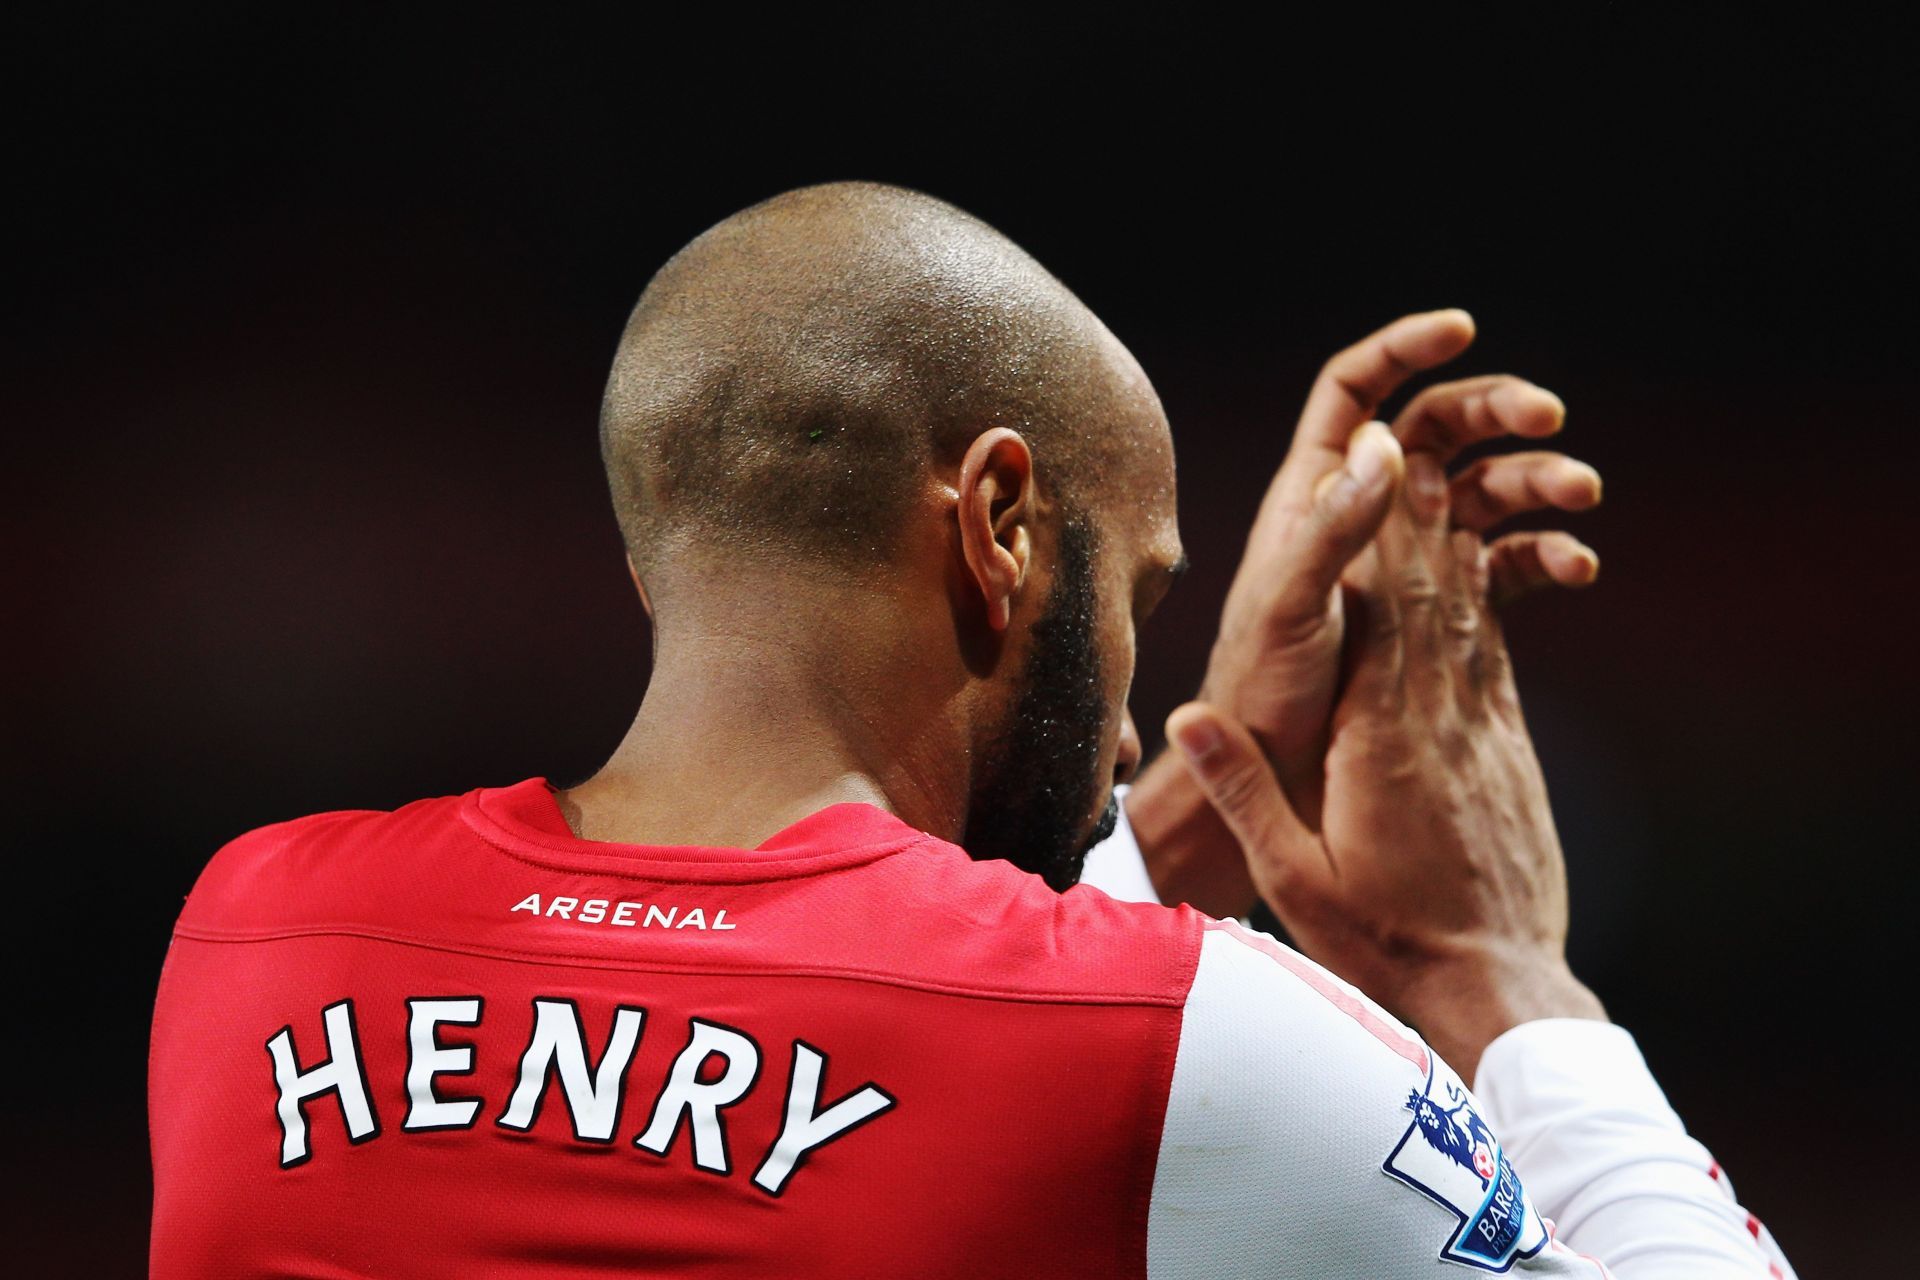 Arsenal legend Thierry Henry.